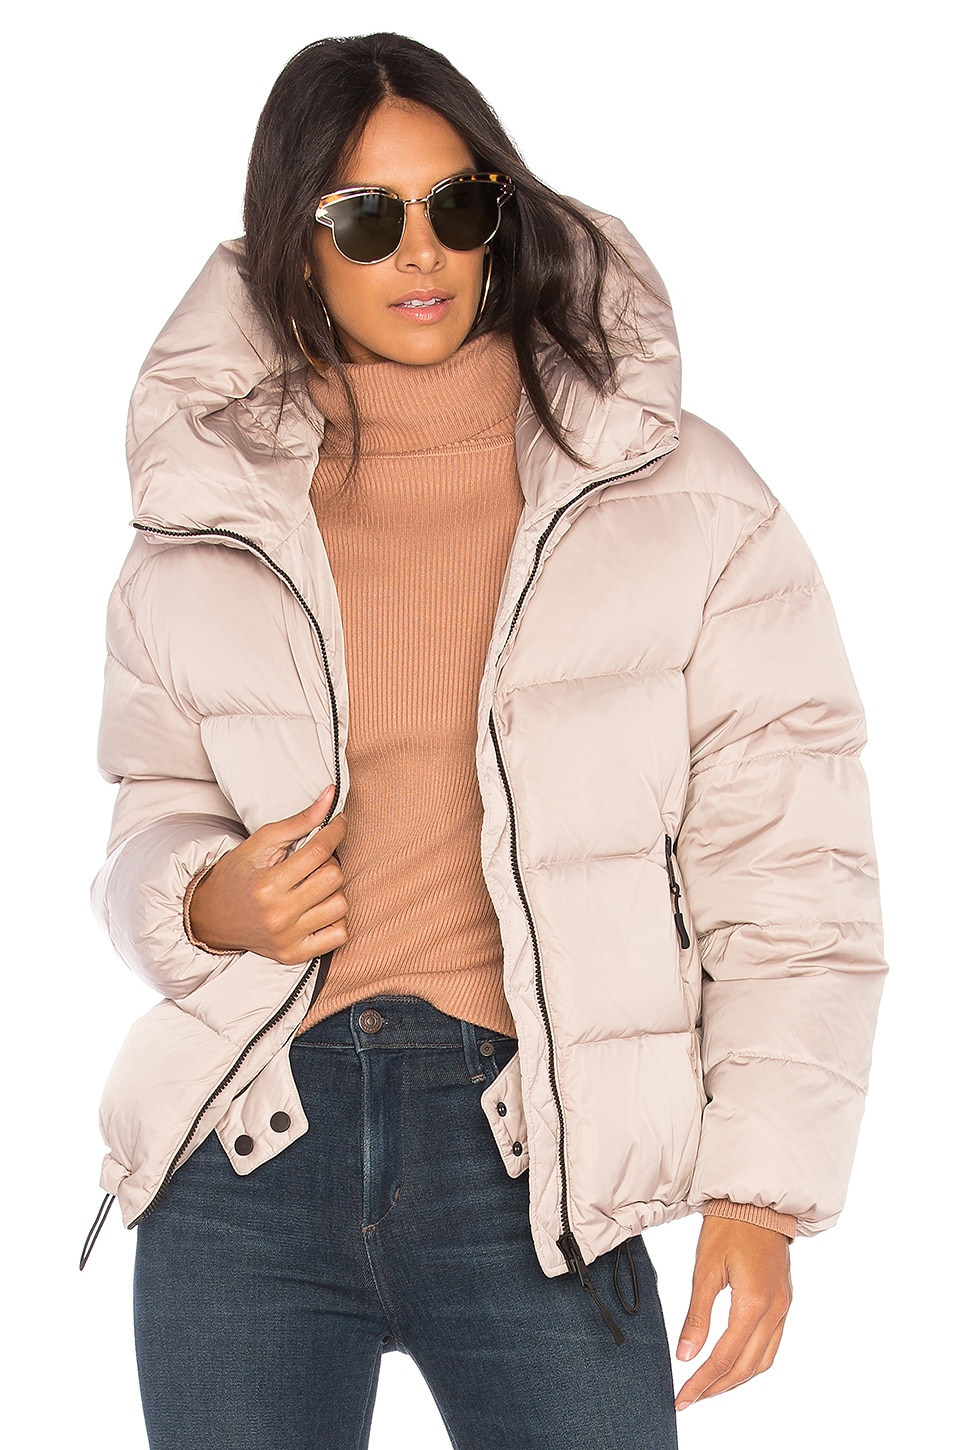 Soia & Kyo Brittany Puffer Jacket in Putty | REVOLVE